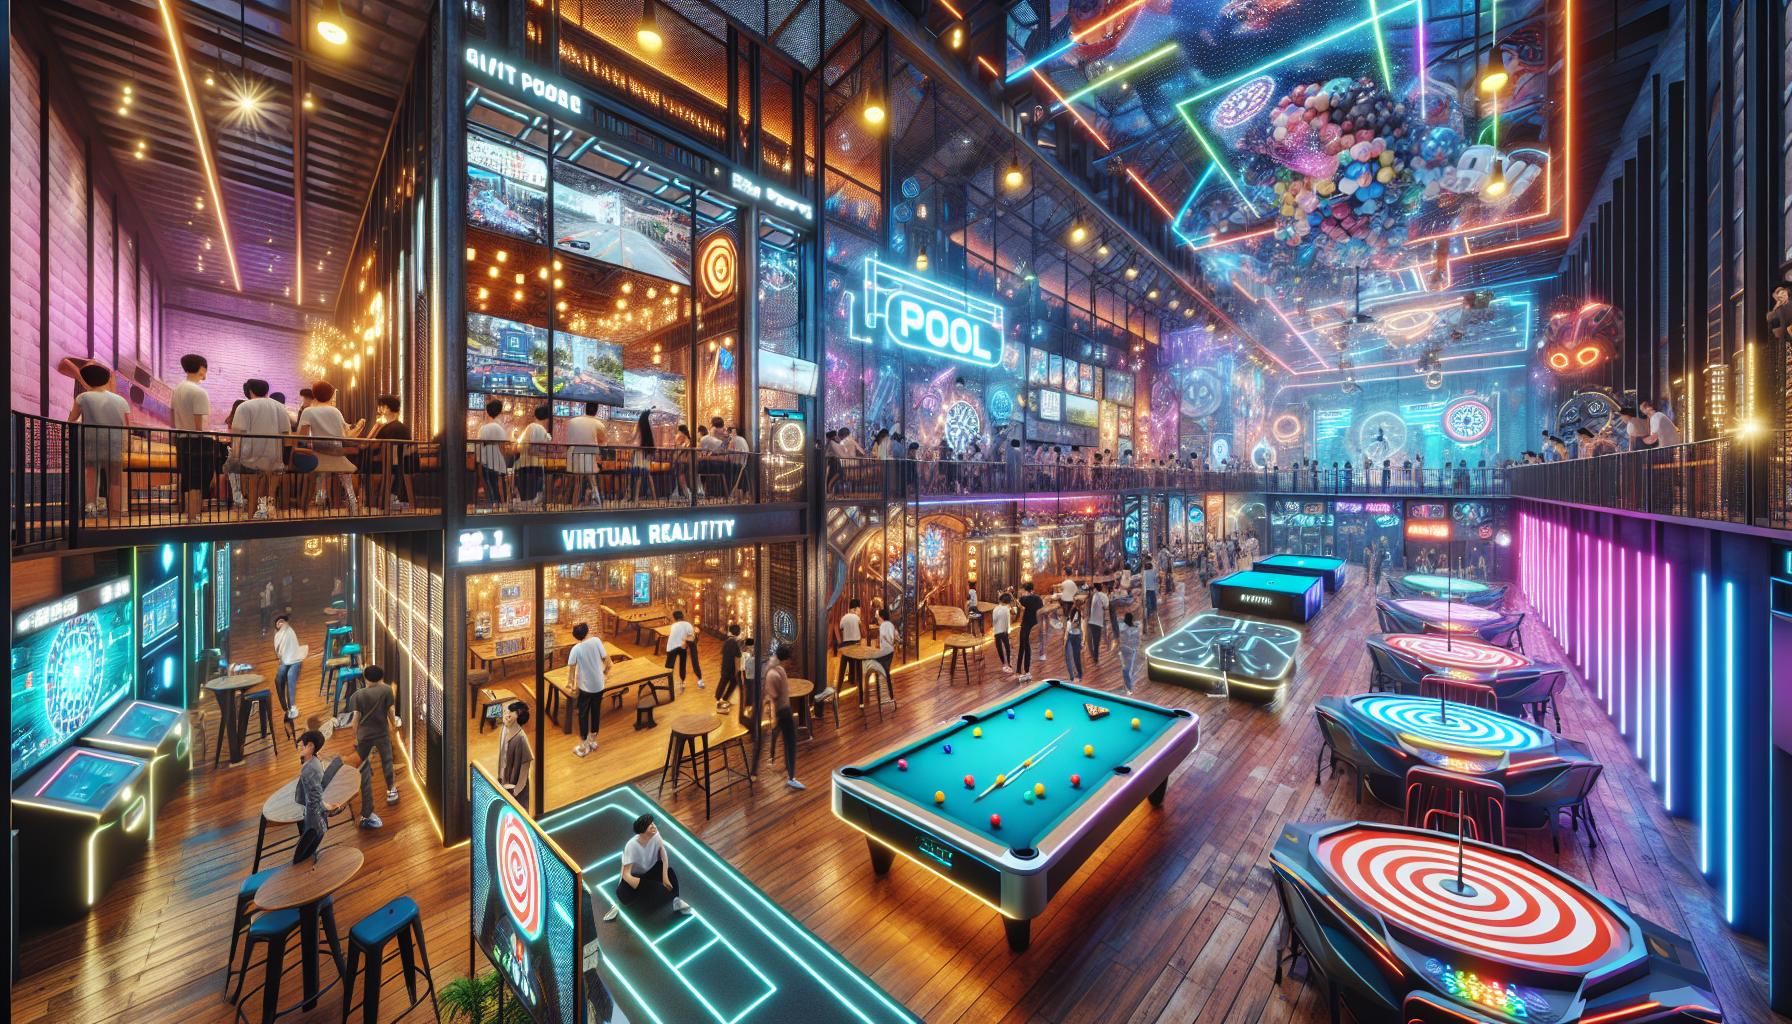 New Entertainment Offerings in Bay City: Virtual Reality, Foot Pool, and Pop Darts | FinOracle